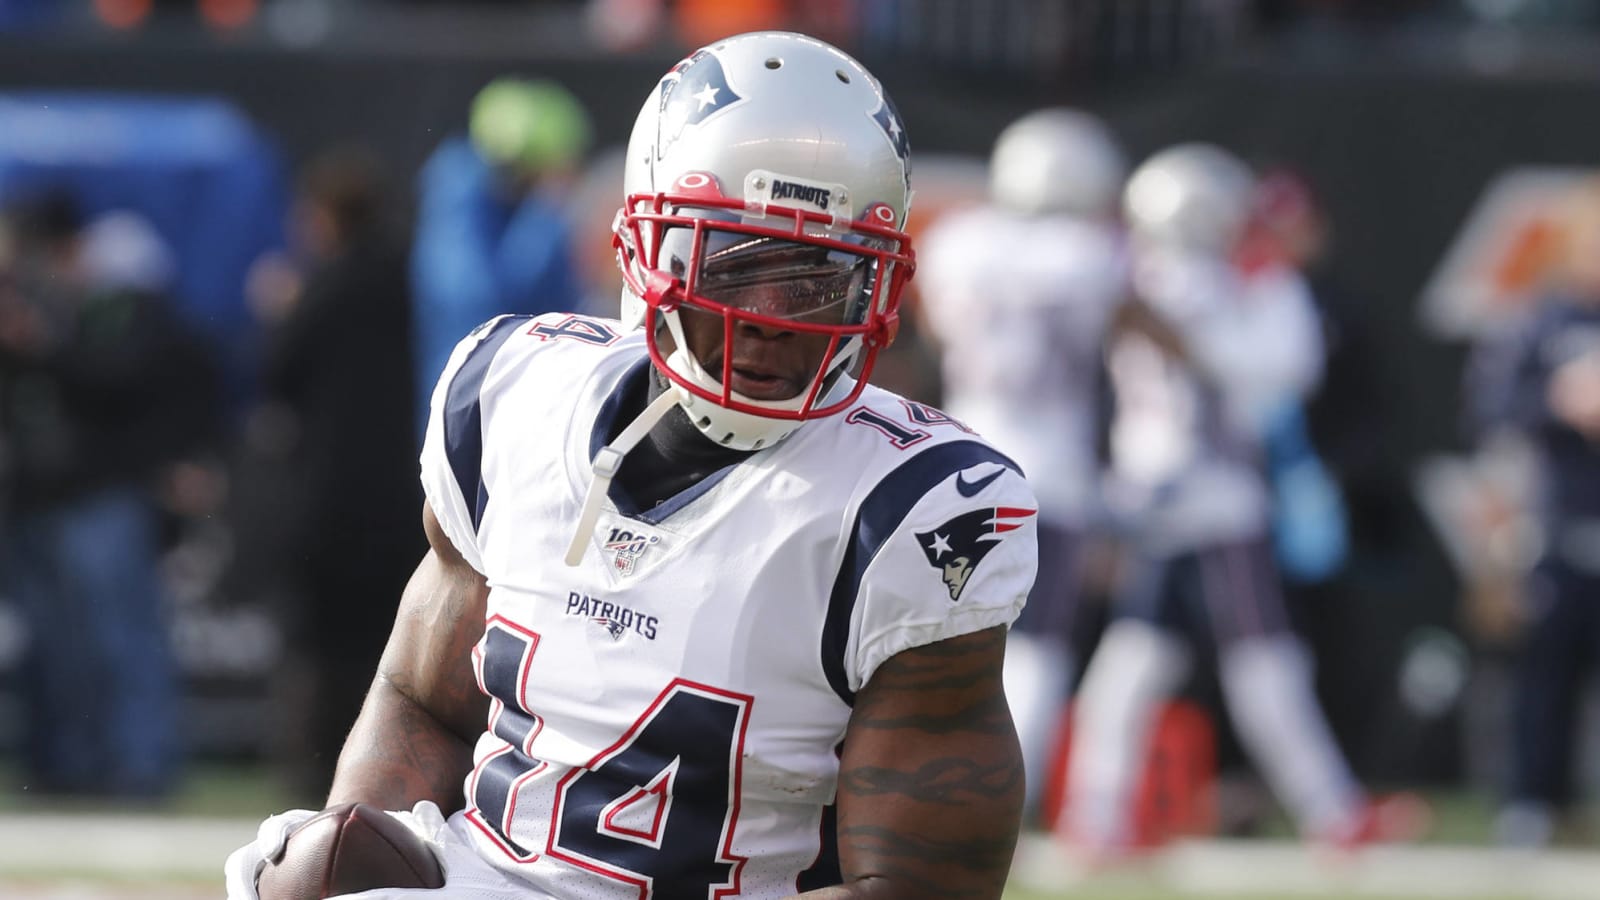 Mohamed Sanu weighs in on lack of success with Patriots